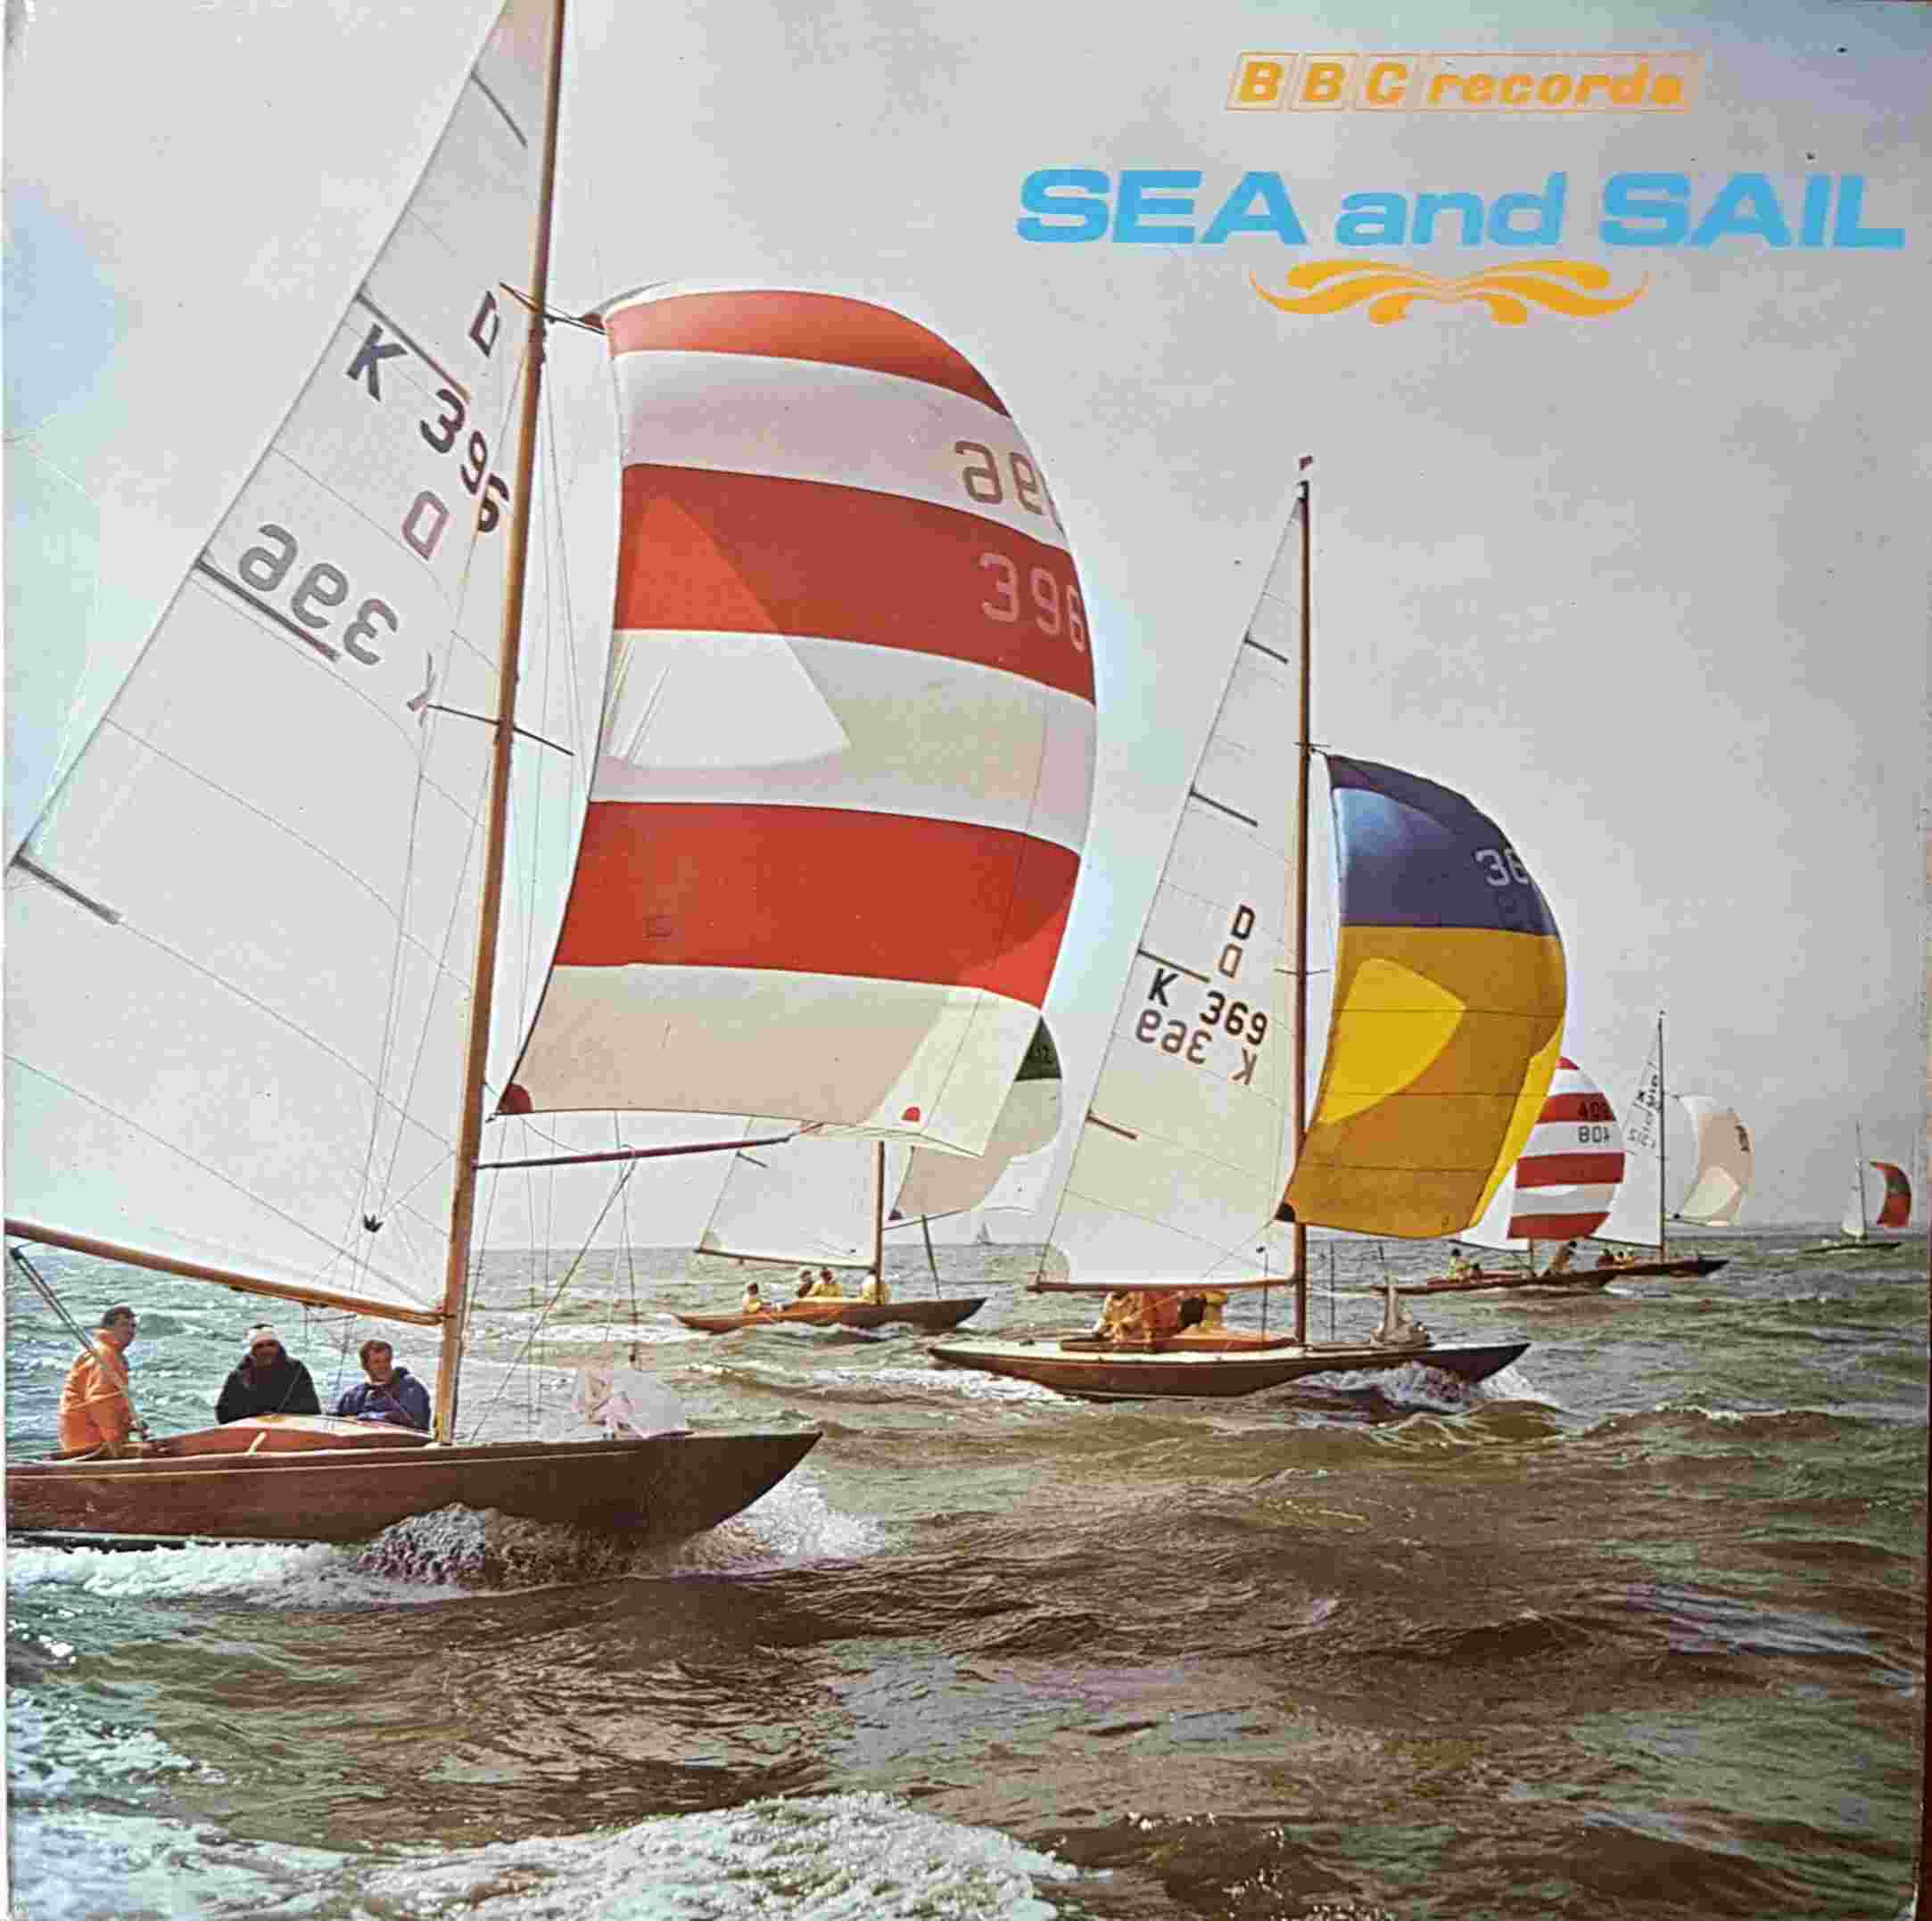 Picture of REC 111 Sea and sail by artist Various from the BBC albums - Records and Tapes library